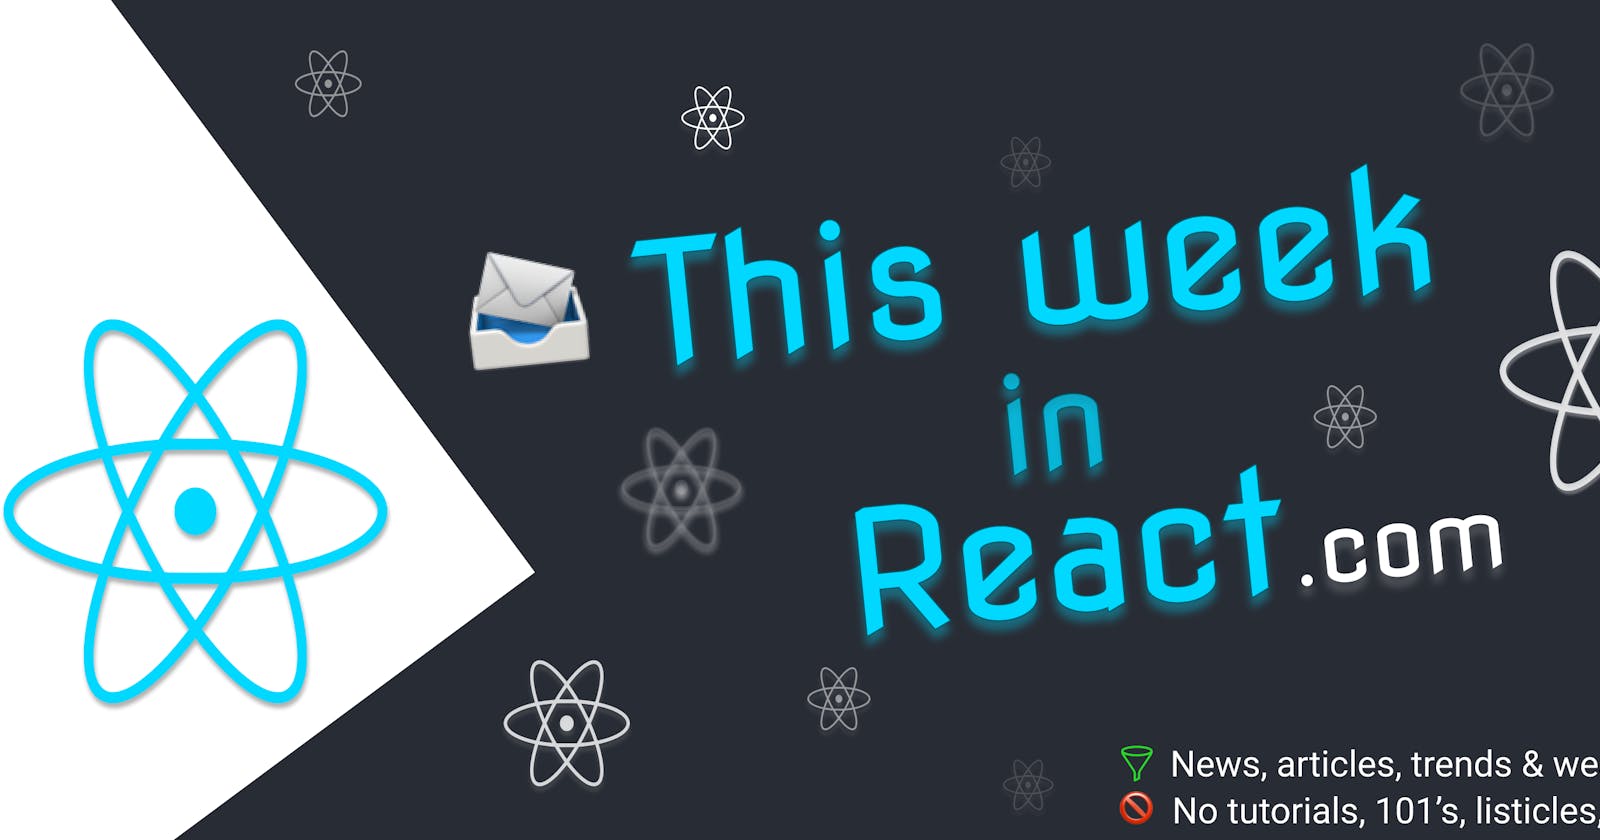 This Week In React #134: Gatsby ️ Netlify, React DOM for Native, XState, Flashlight, re-renders, Custom Hooks...